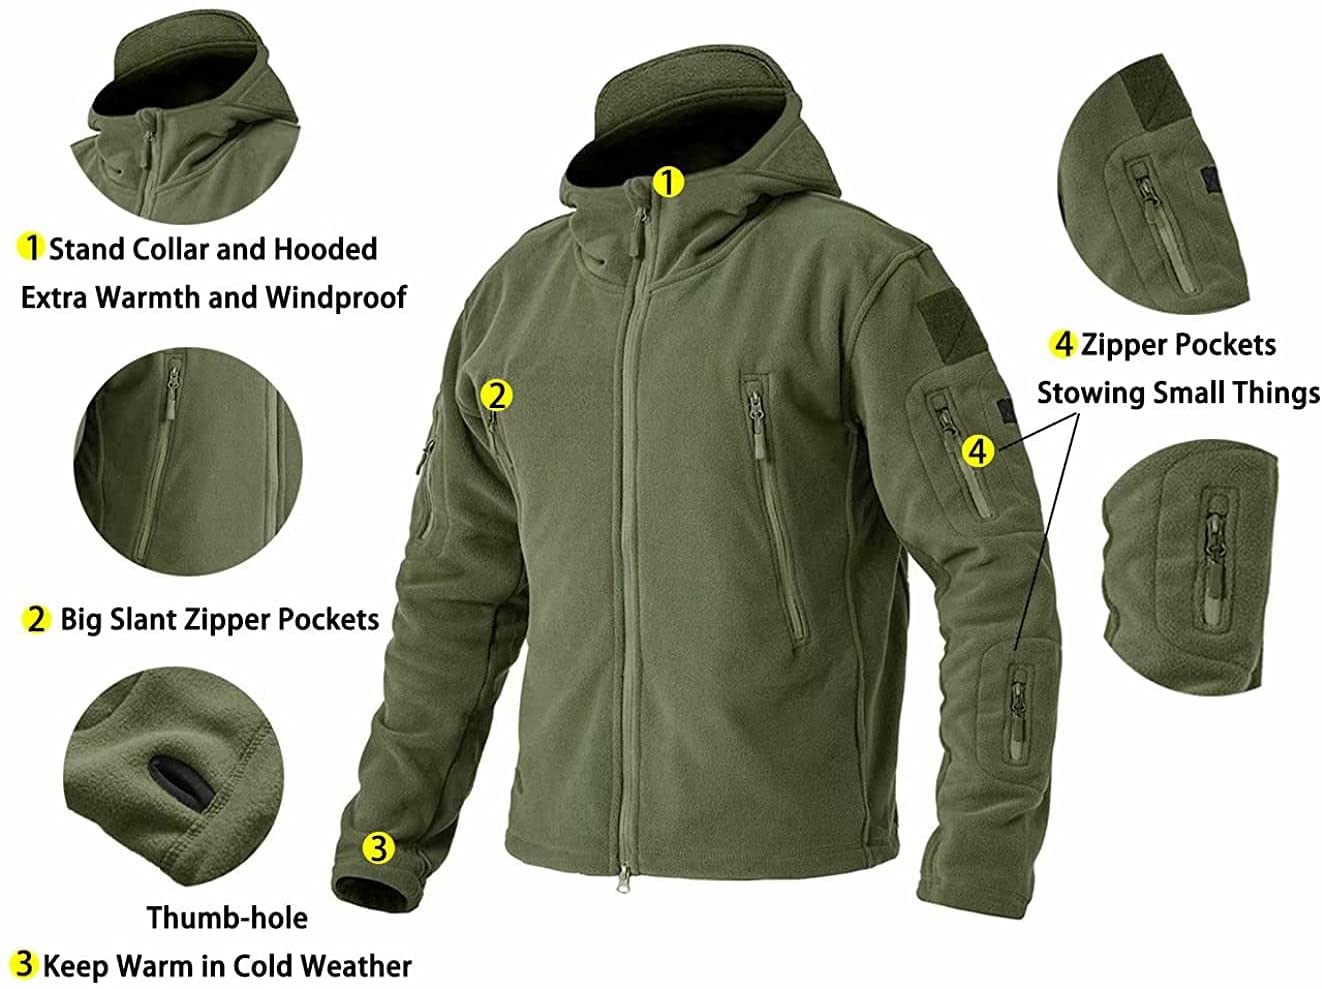 hiking fleece mens with stand collar, removable hood, 8 zipper pockets